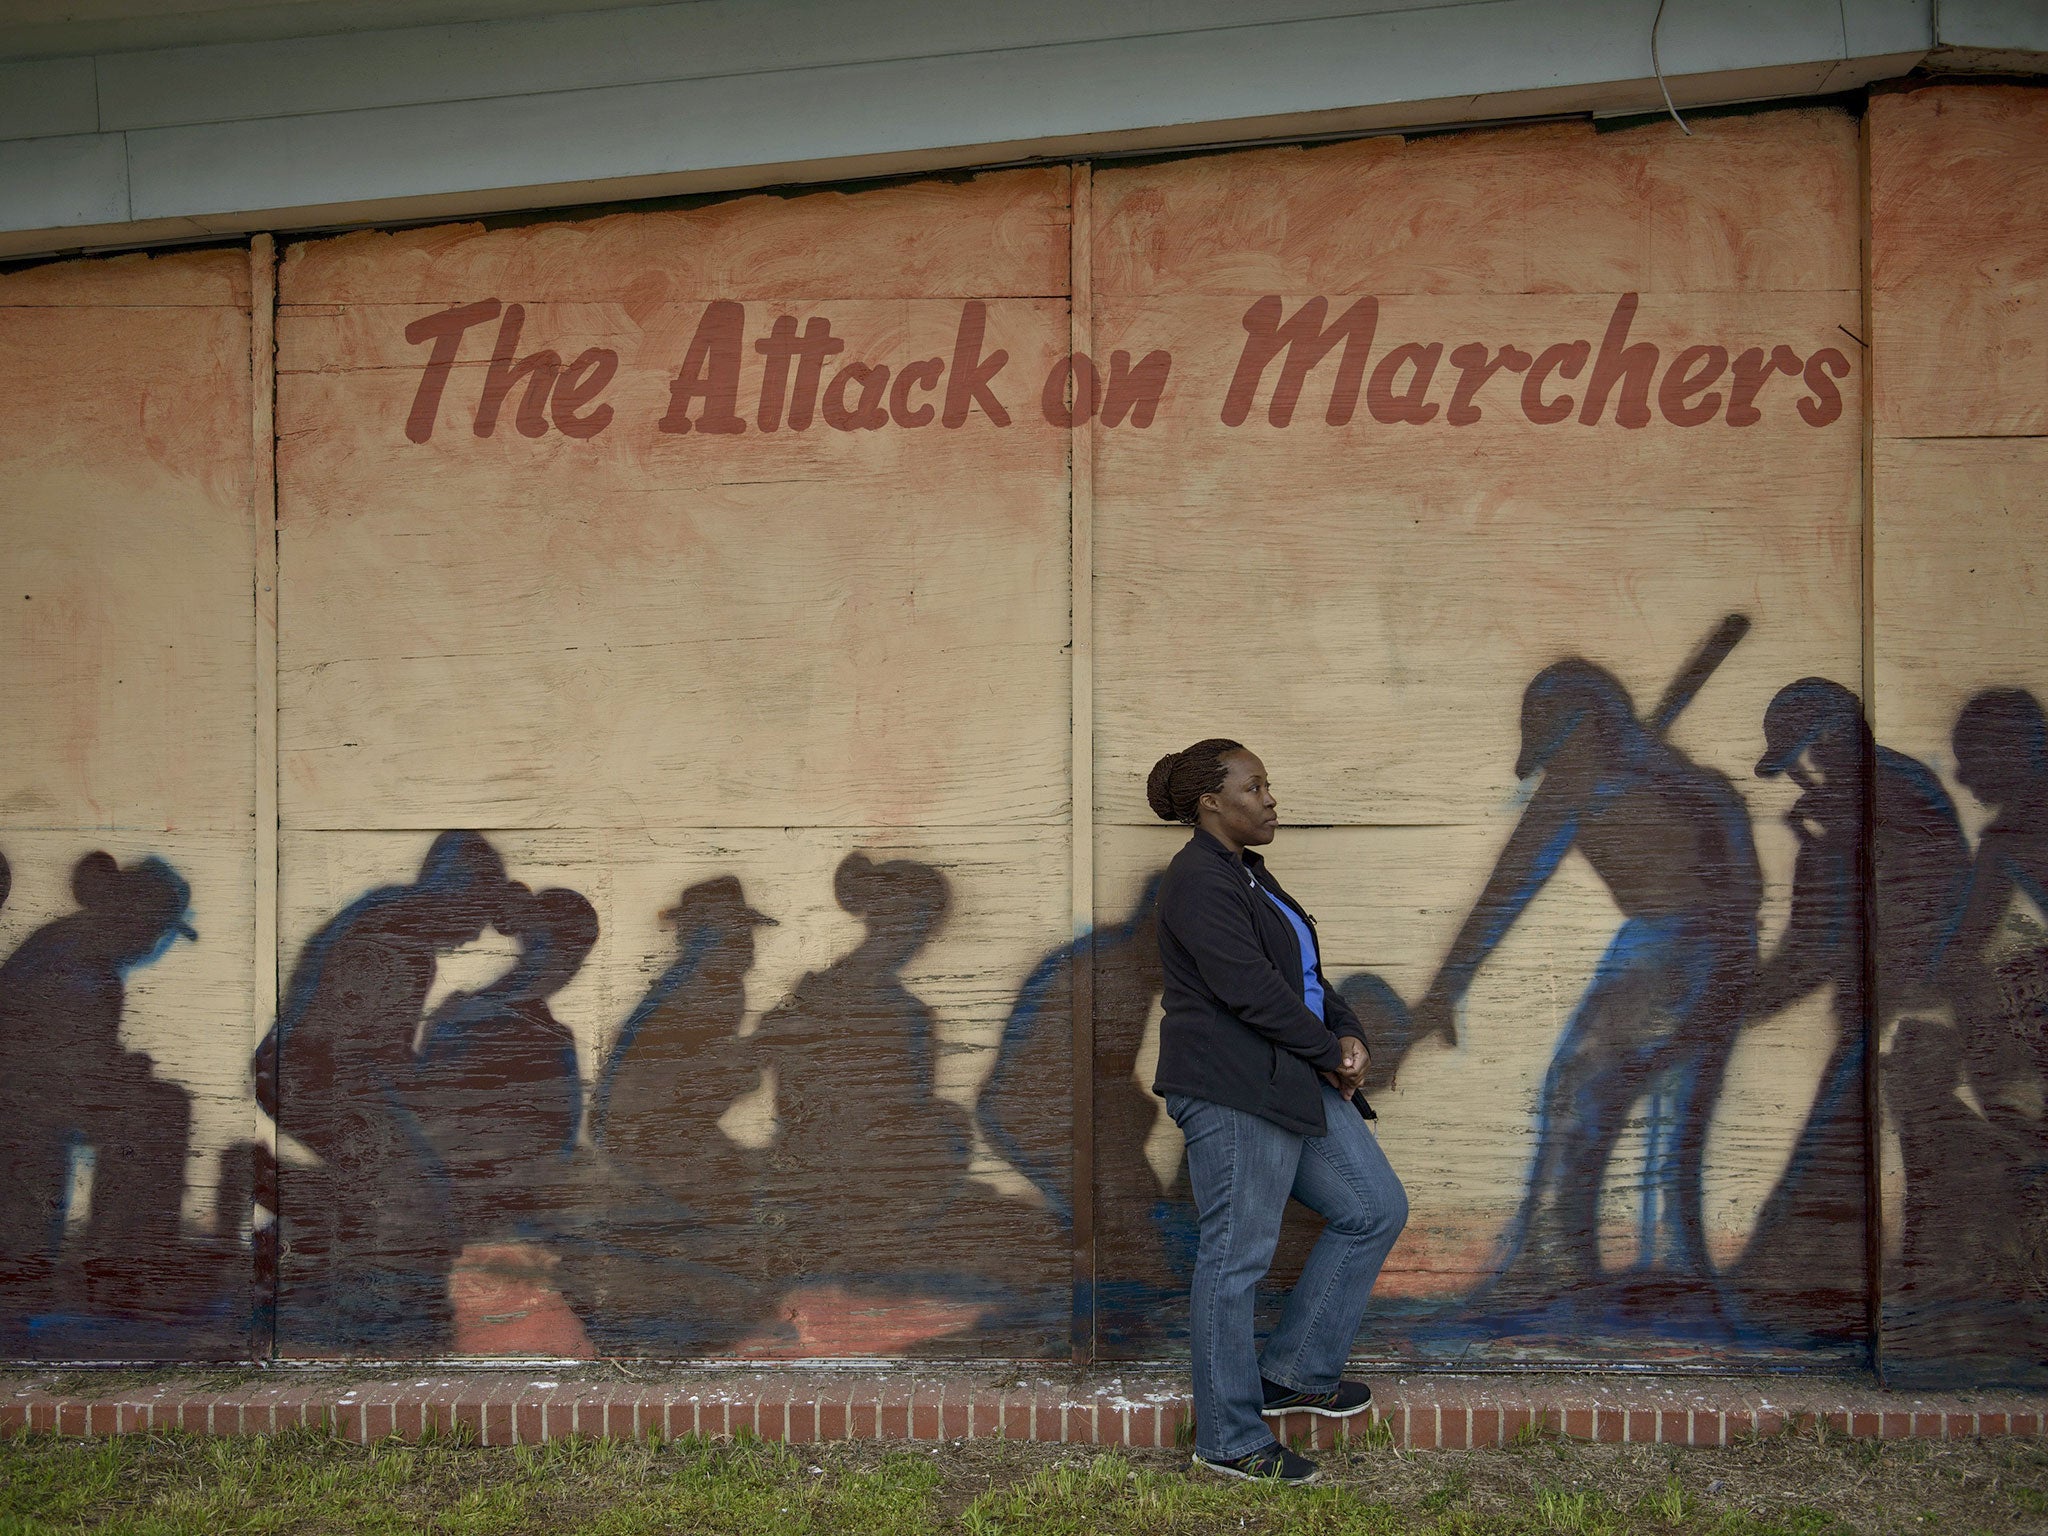 Segregation is still built in: anniversary of Bloody Sunday in Alabama, 50 years ago